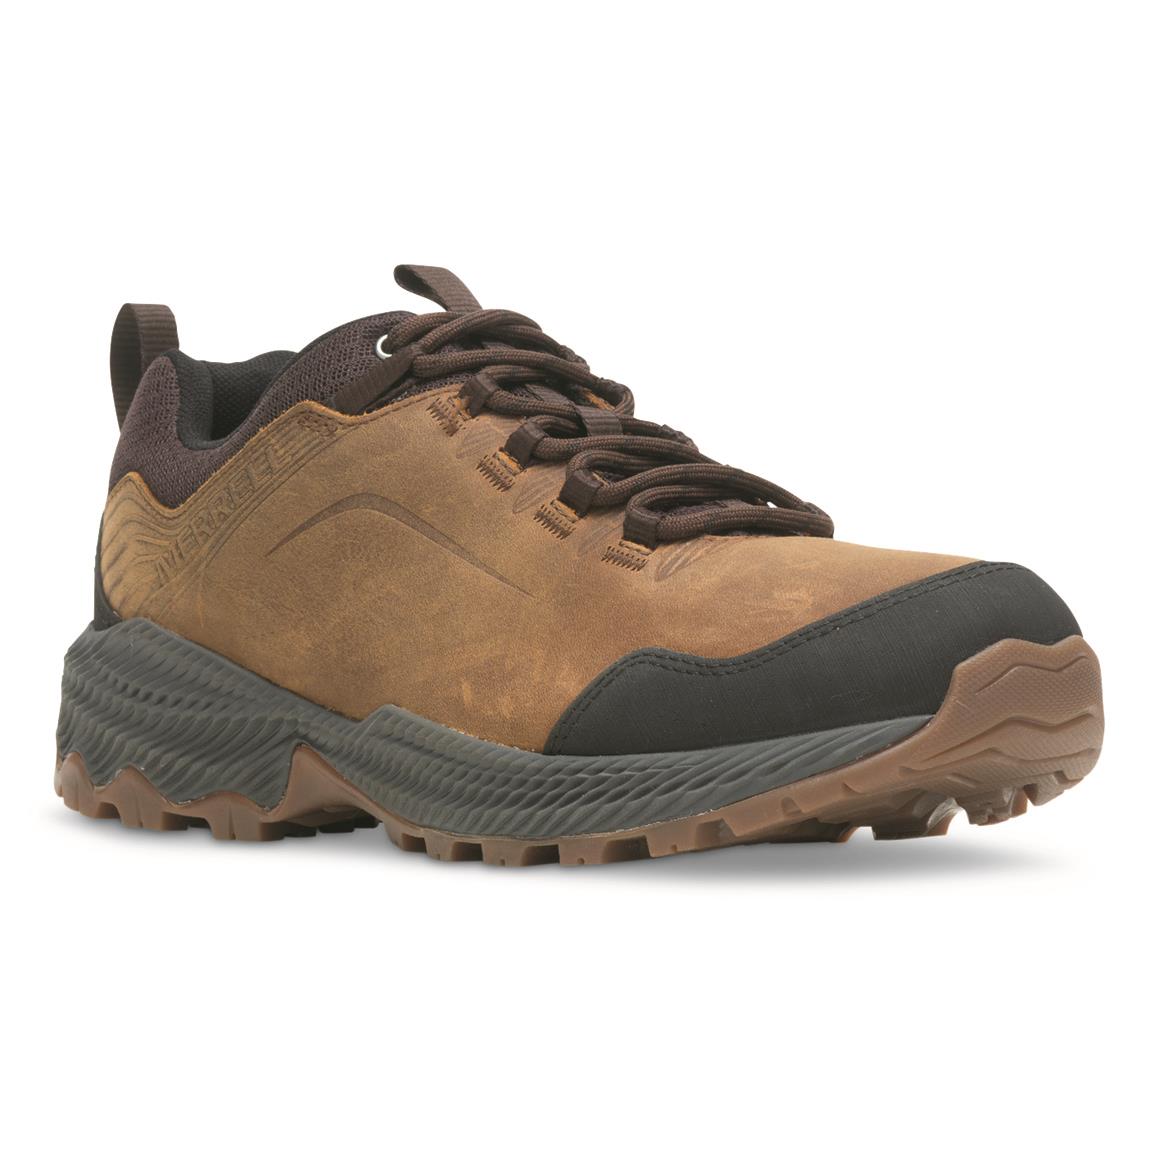 Merrell Men's Forestbound Hiking Shoes, Merrell Tan